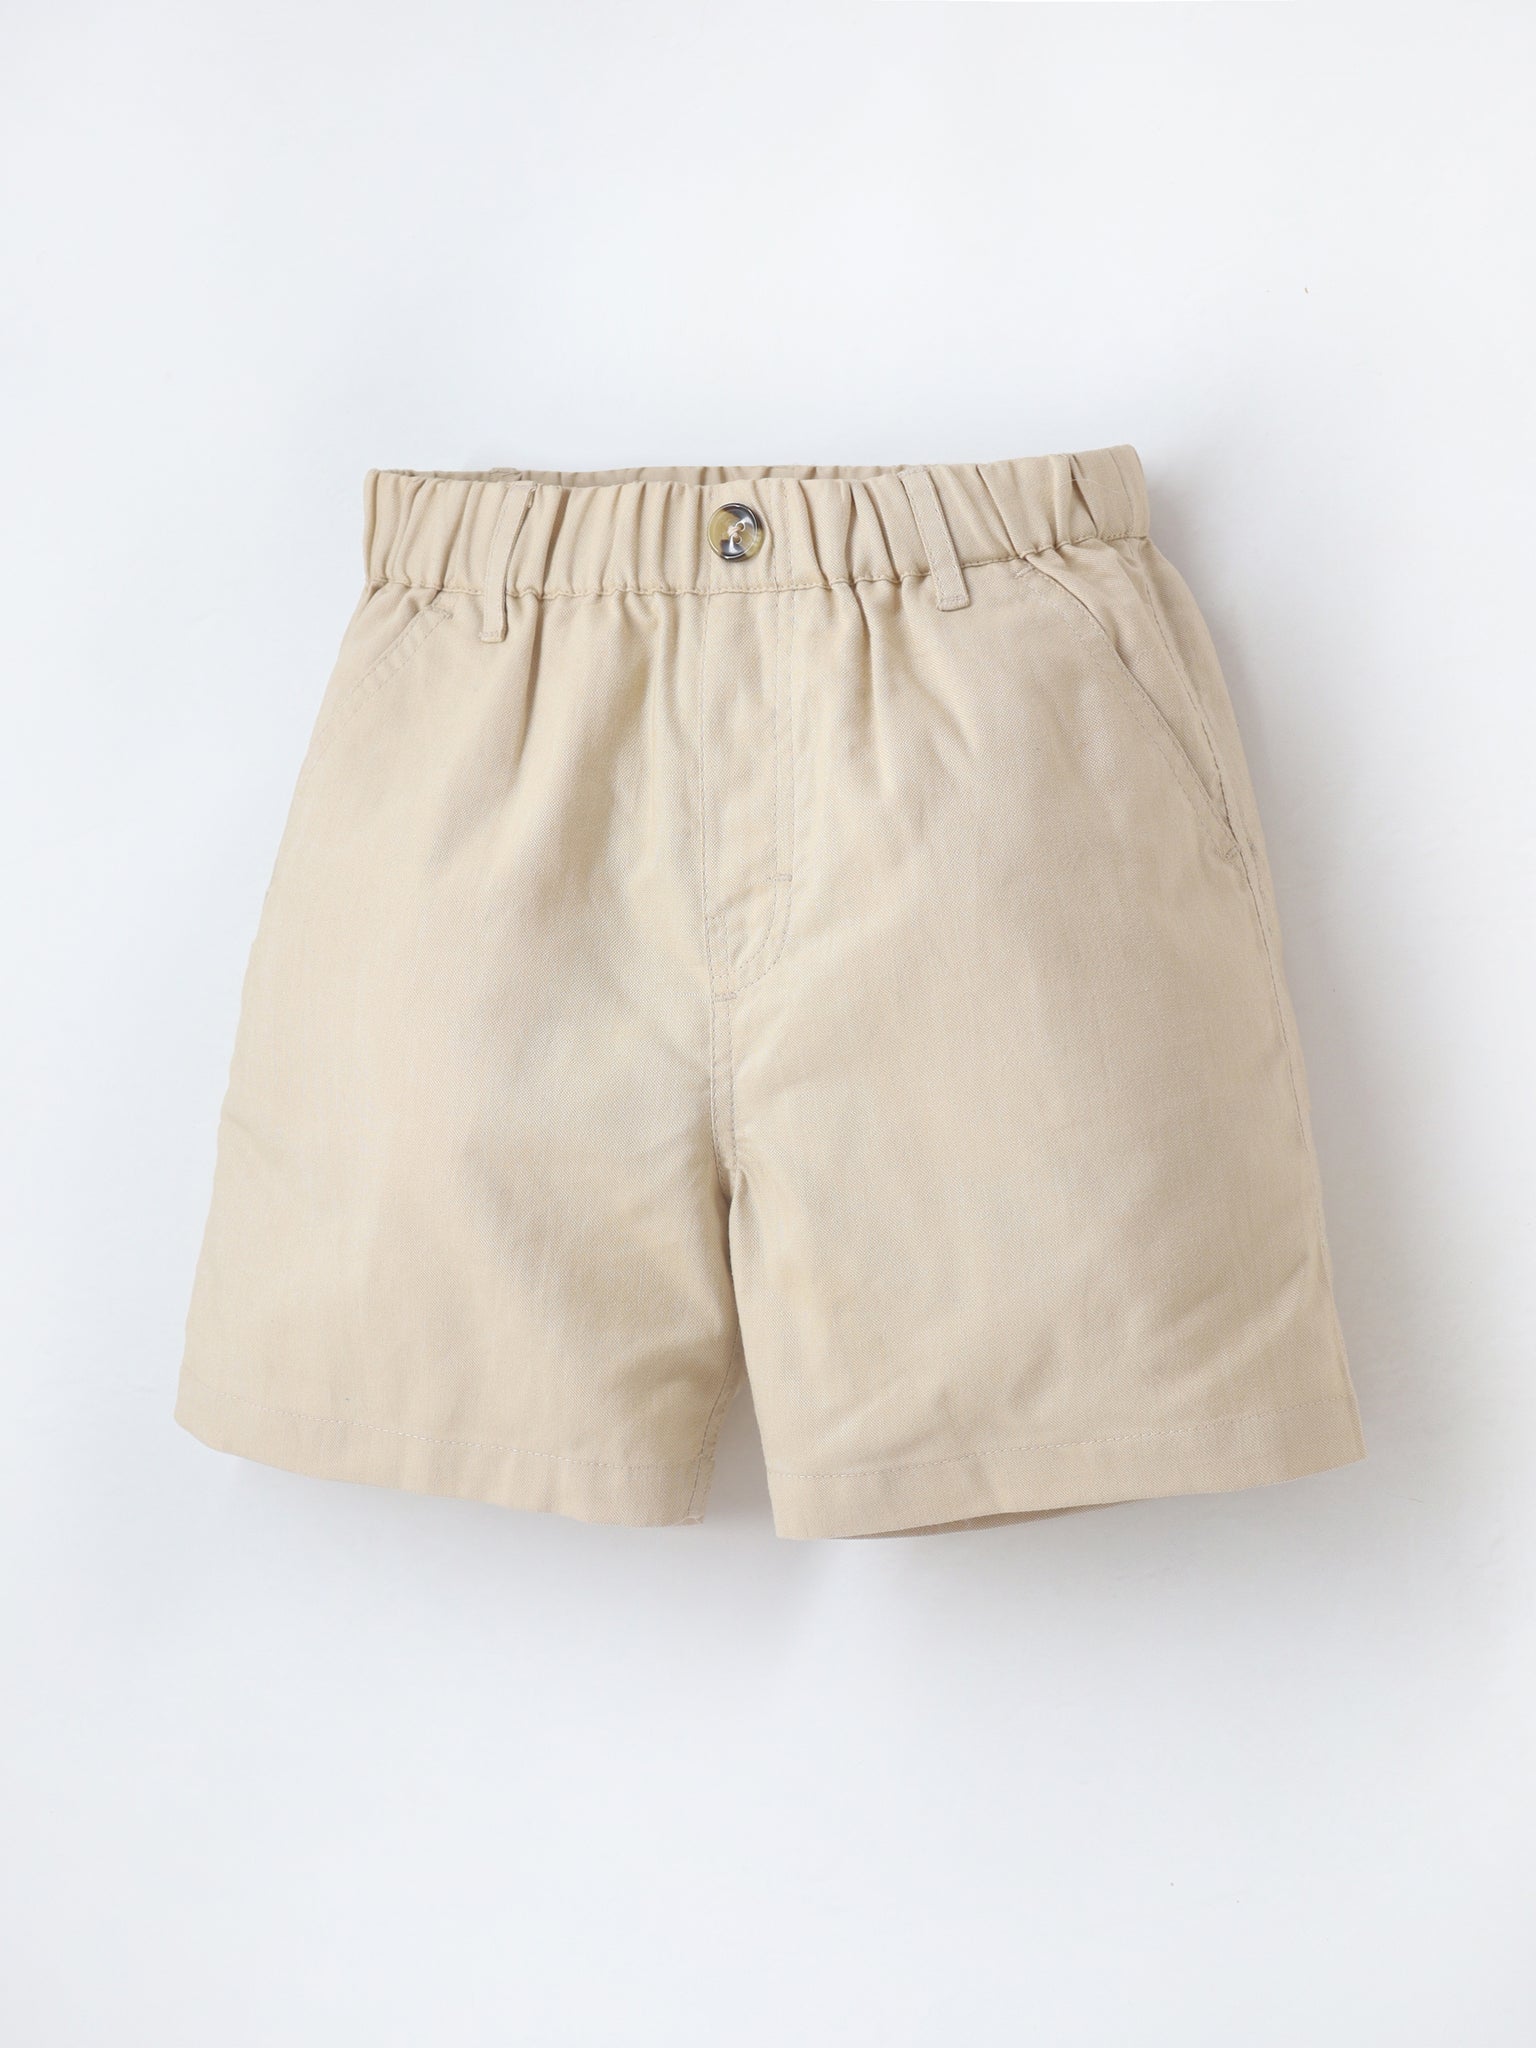 Smart Casual Cotton Beige Knee Length Button Closure with Pockets Shorts For Boys